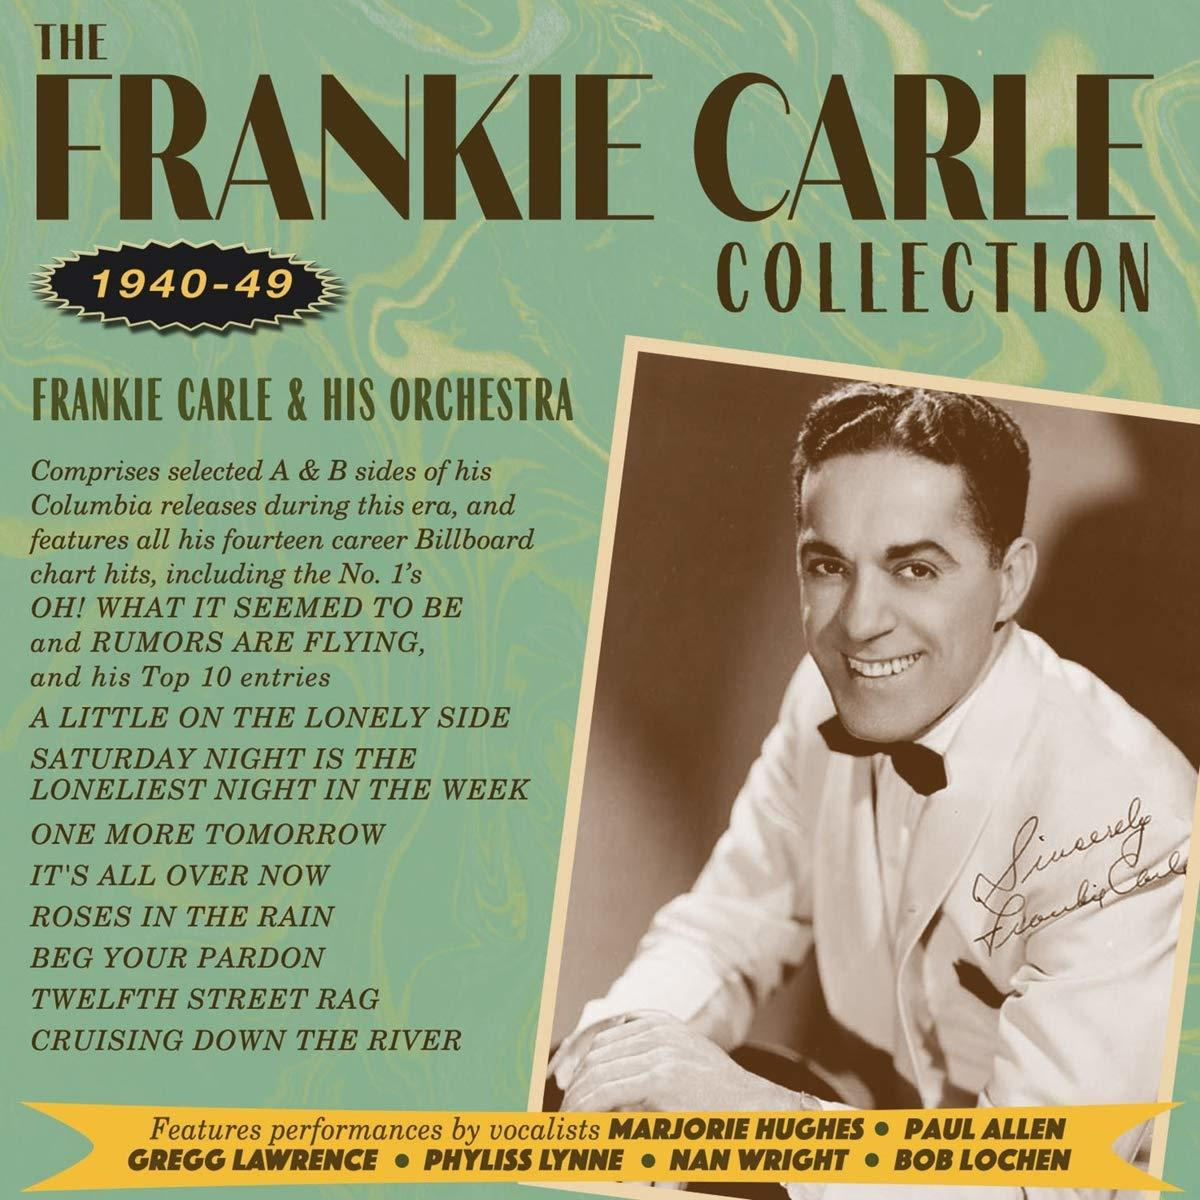 Frankie & His Orchestra CARLE Carle 1940-49 COLLECTION - (CD) FRANKIE 